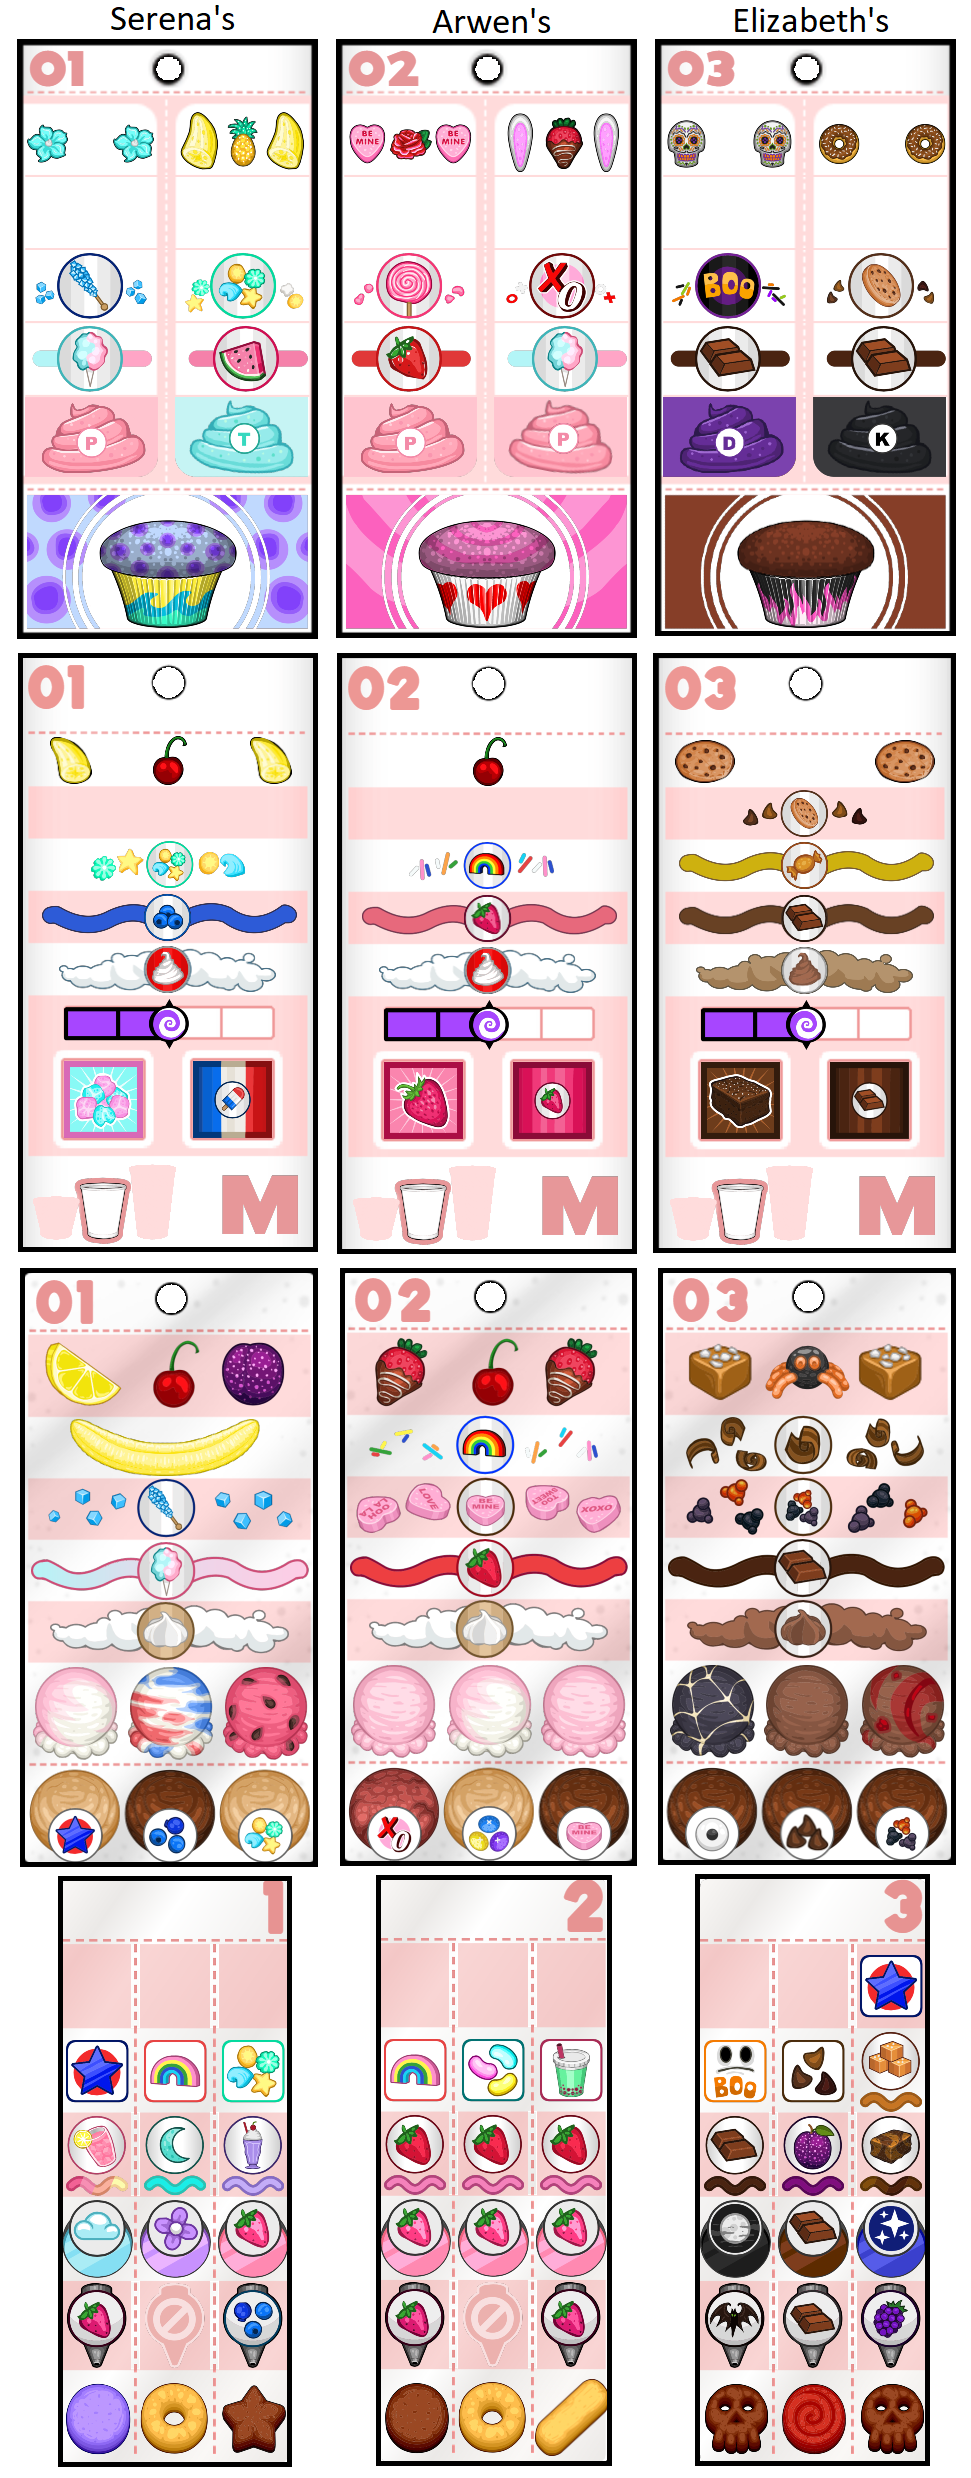 Papa's Cupcakeria HD Apk Android Download for Free by oliverpetegamesapk on  DeviantArt